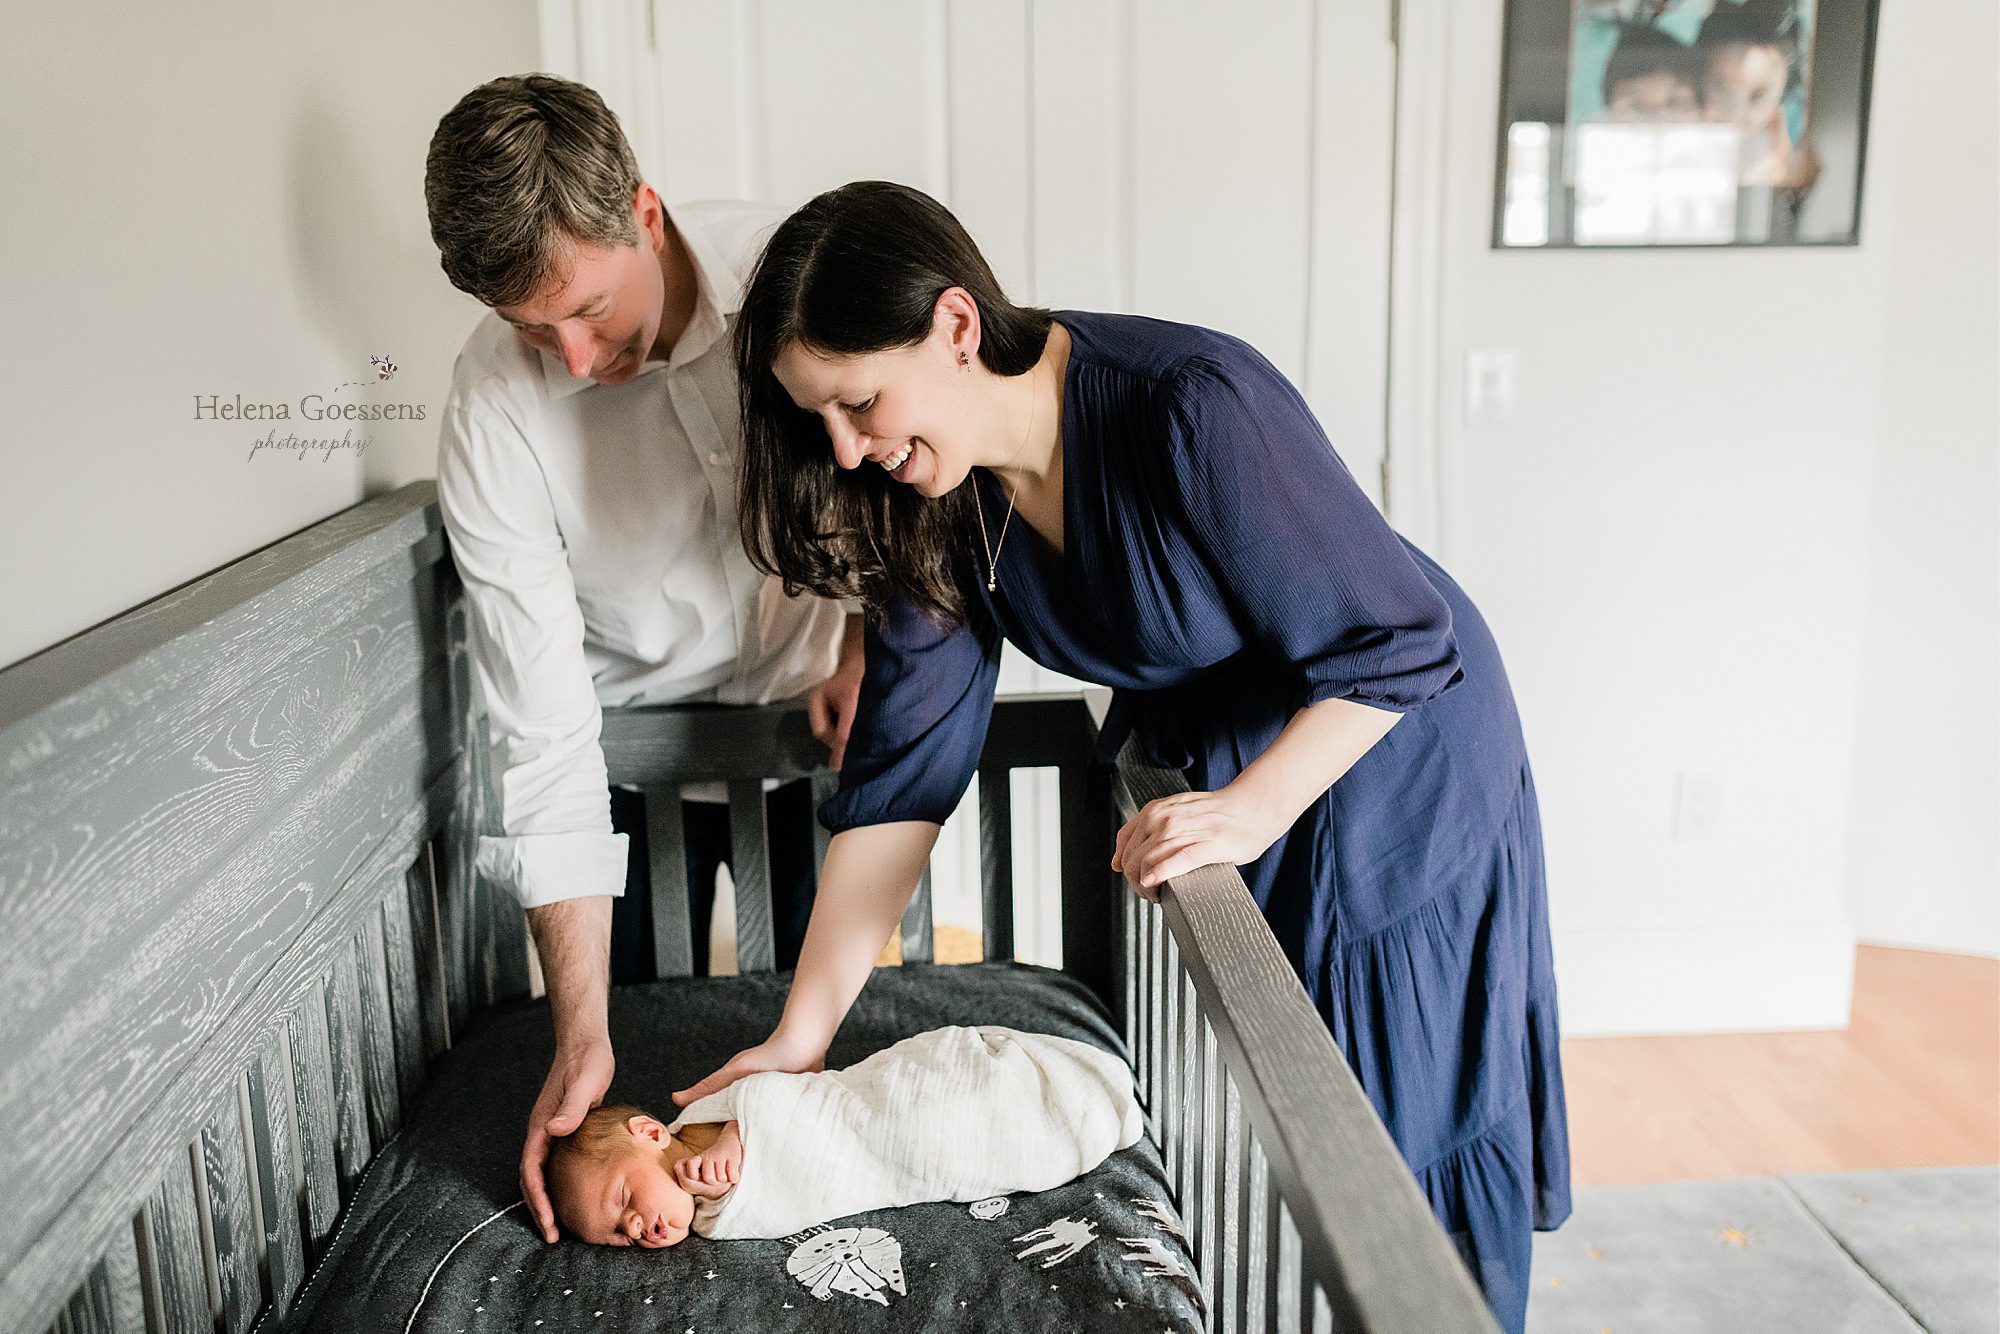 lifestyle newborn session in nursery with Helena Goessens Photography